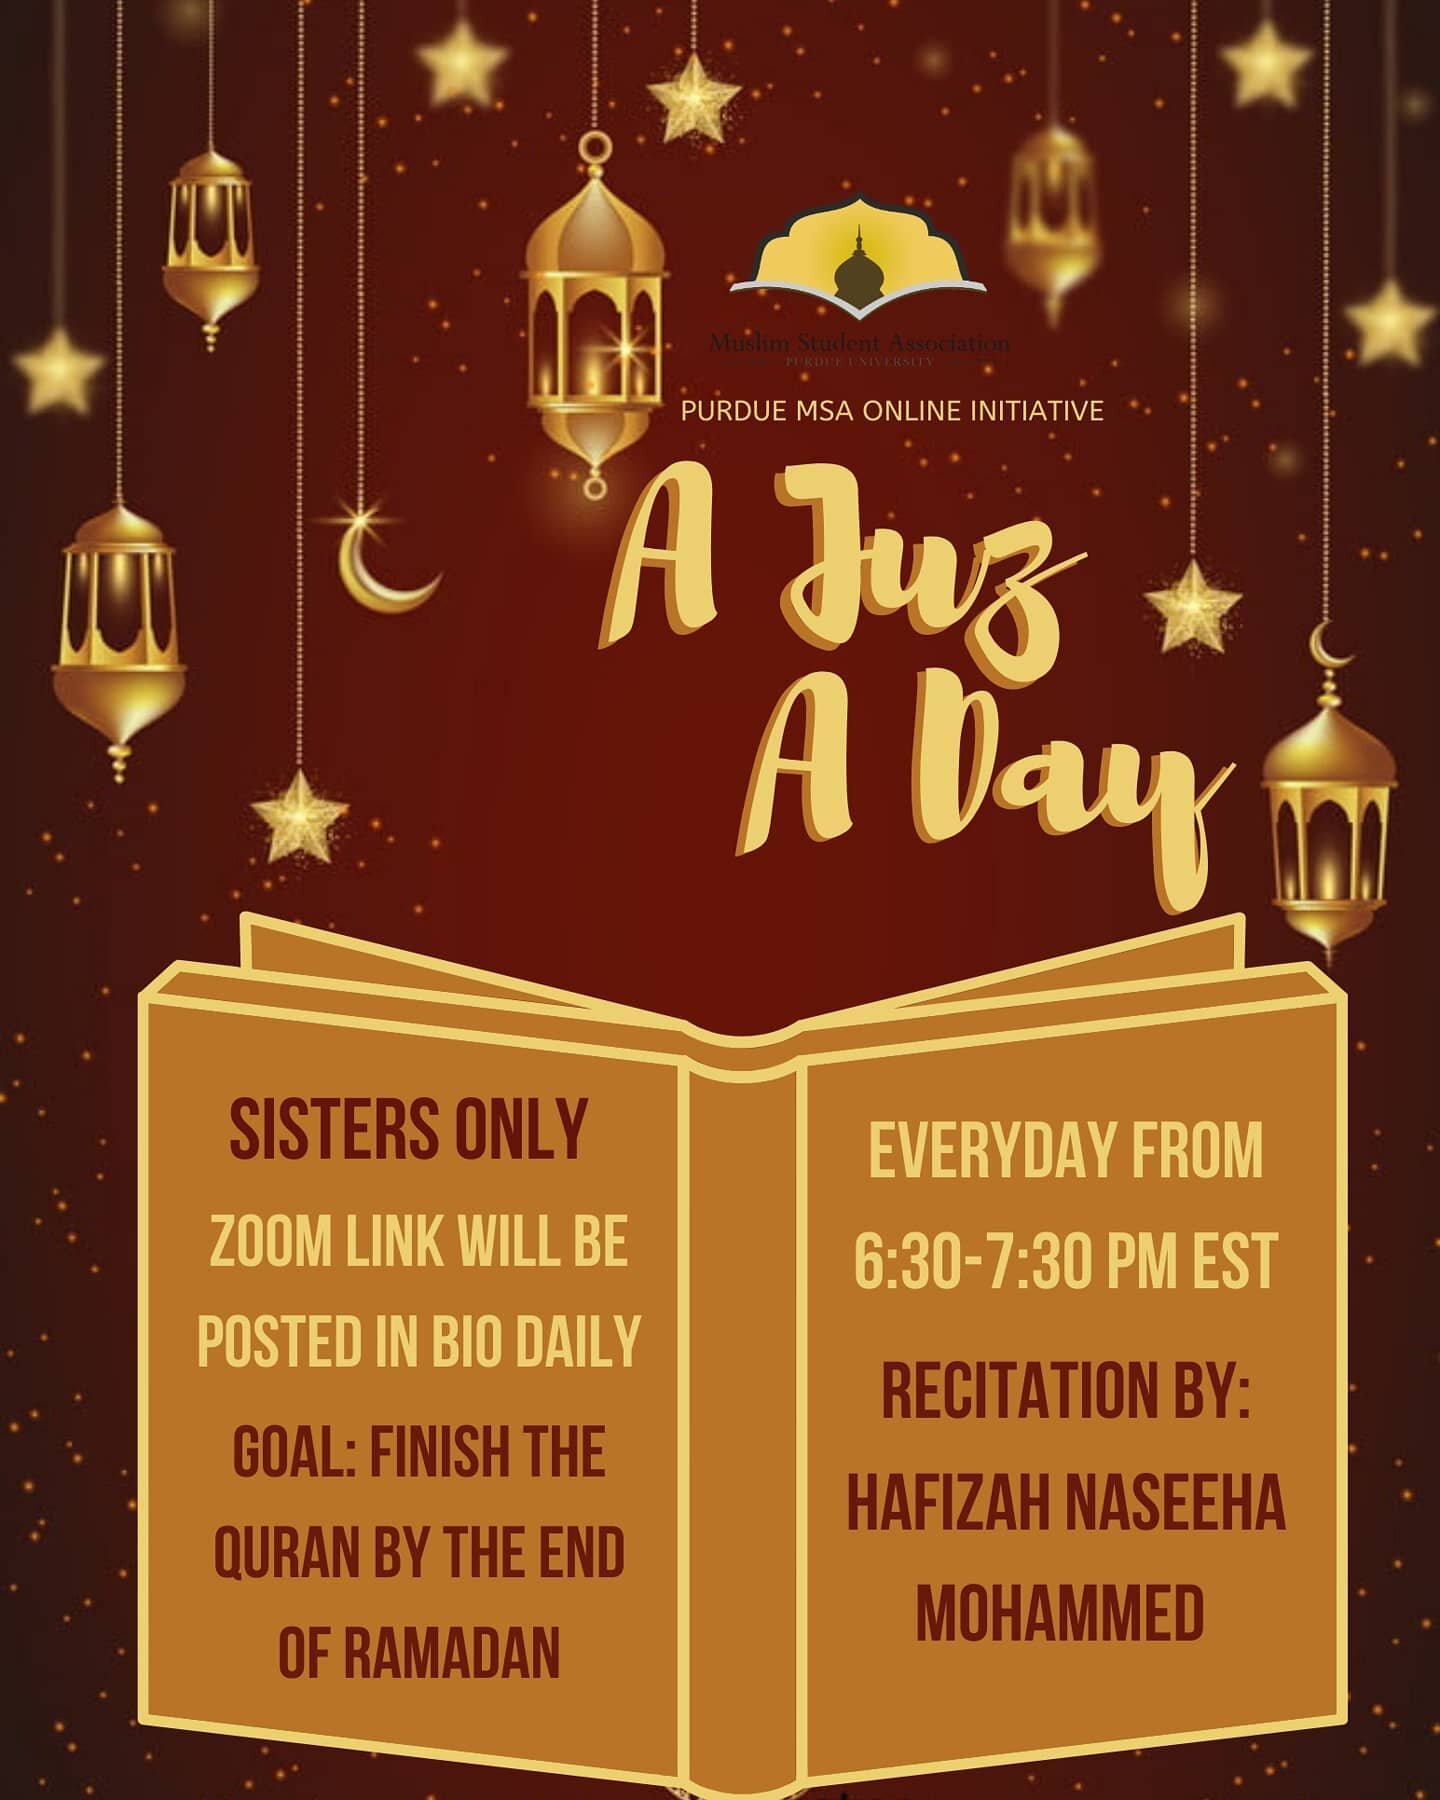 ⚠️Calling all sisters: As part of our online initiative, Purdue MSA welcomes, rather encourages, you to join us nightly as we read one juz of the Quran. The recitation will be by Hafizah Naseeha Mohammed, a rising junior at Purdue. Since we are unabl